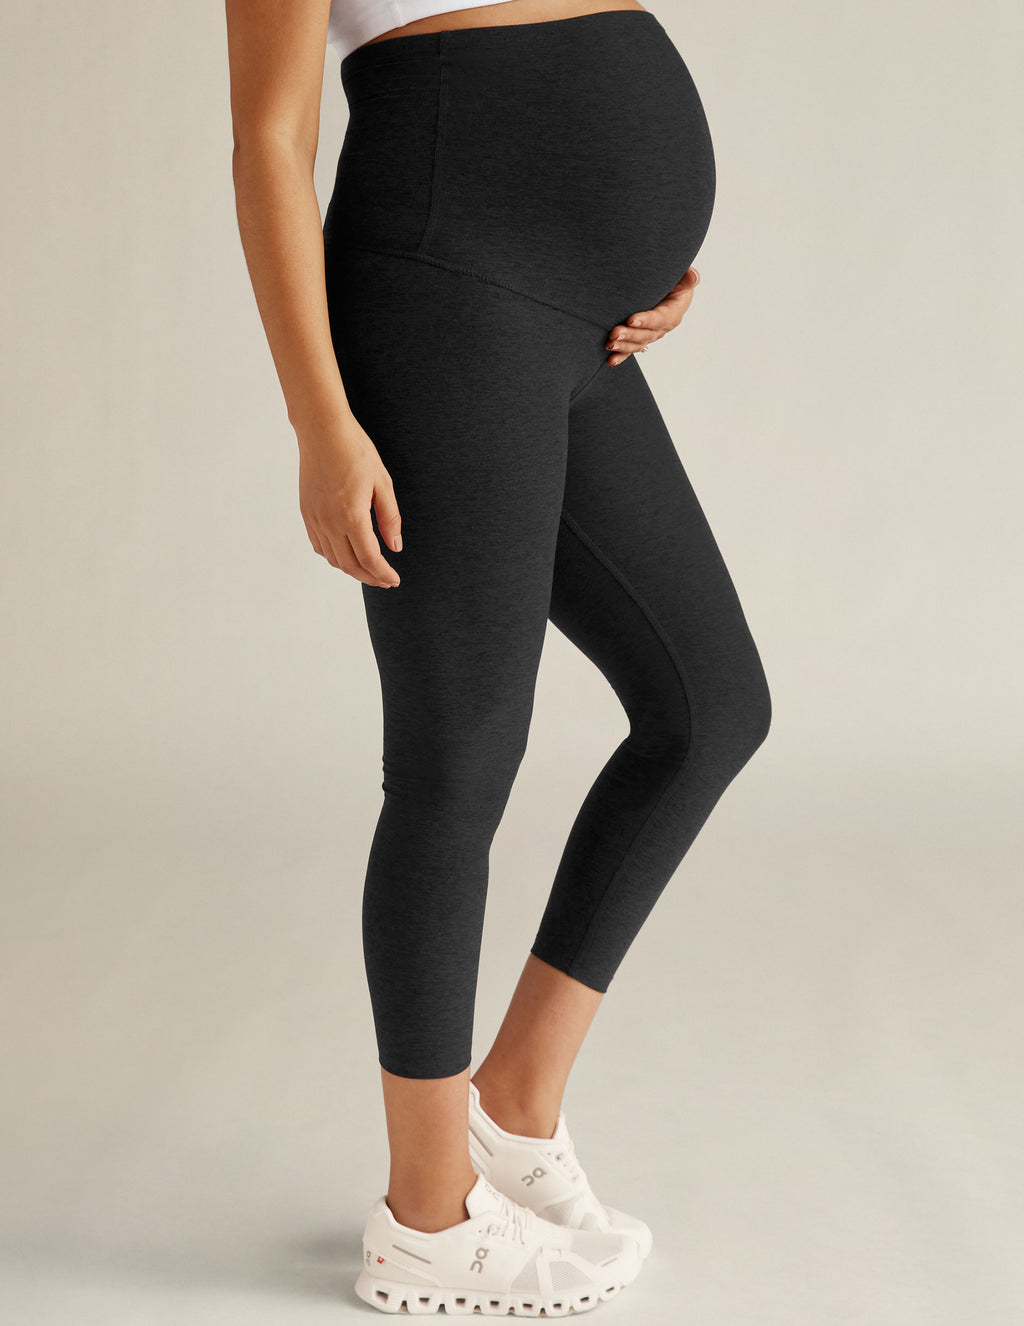 AFITNE Maternity Leggings Over The Belly for Women Pregnancy Yoga Pants  with Pockets Active Workout Tight Leggings Black - L at  Women's  Clothing store